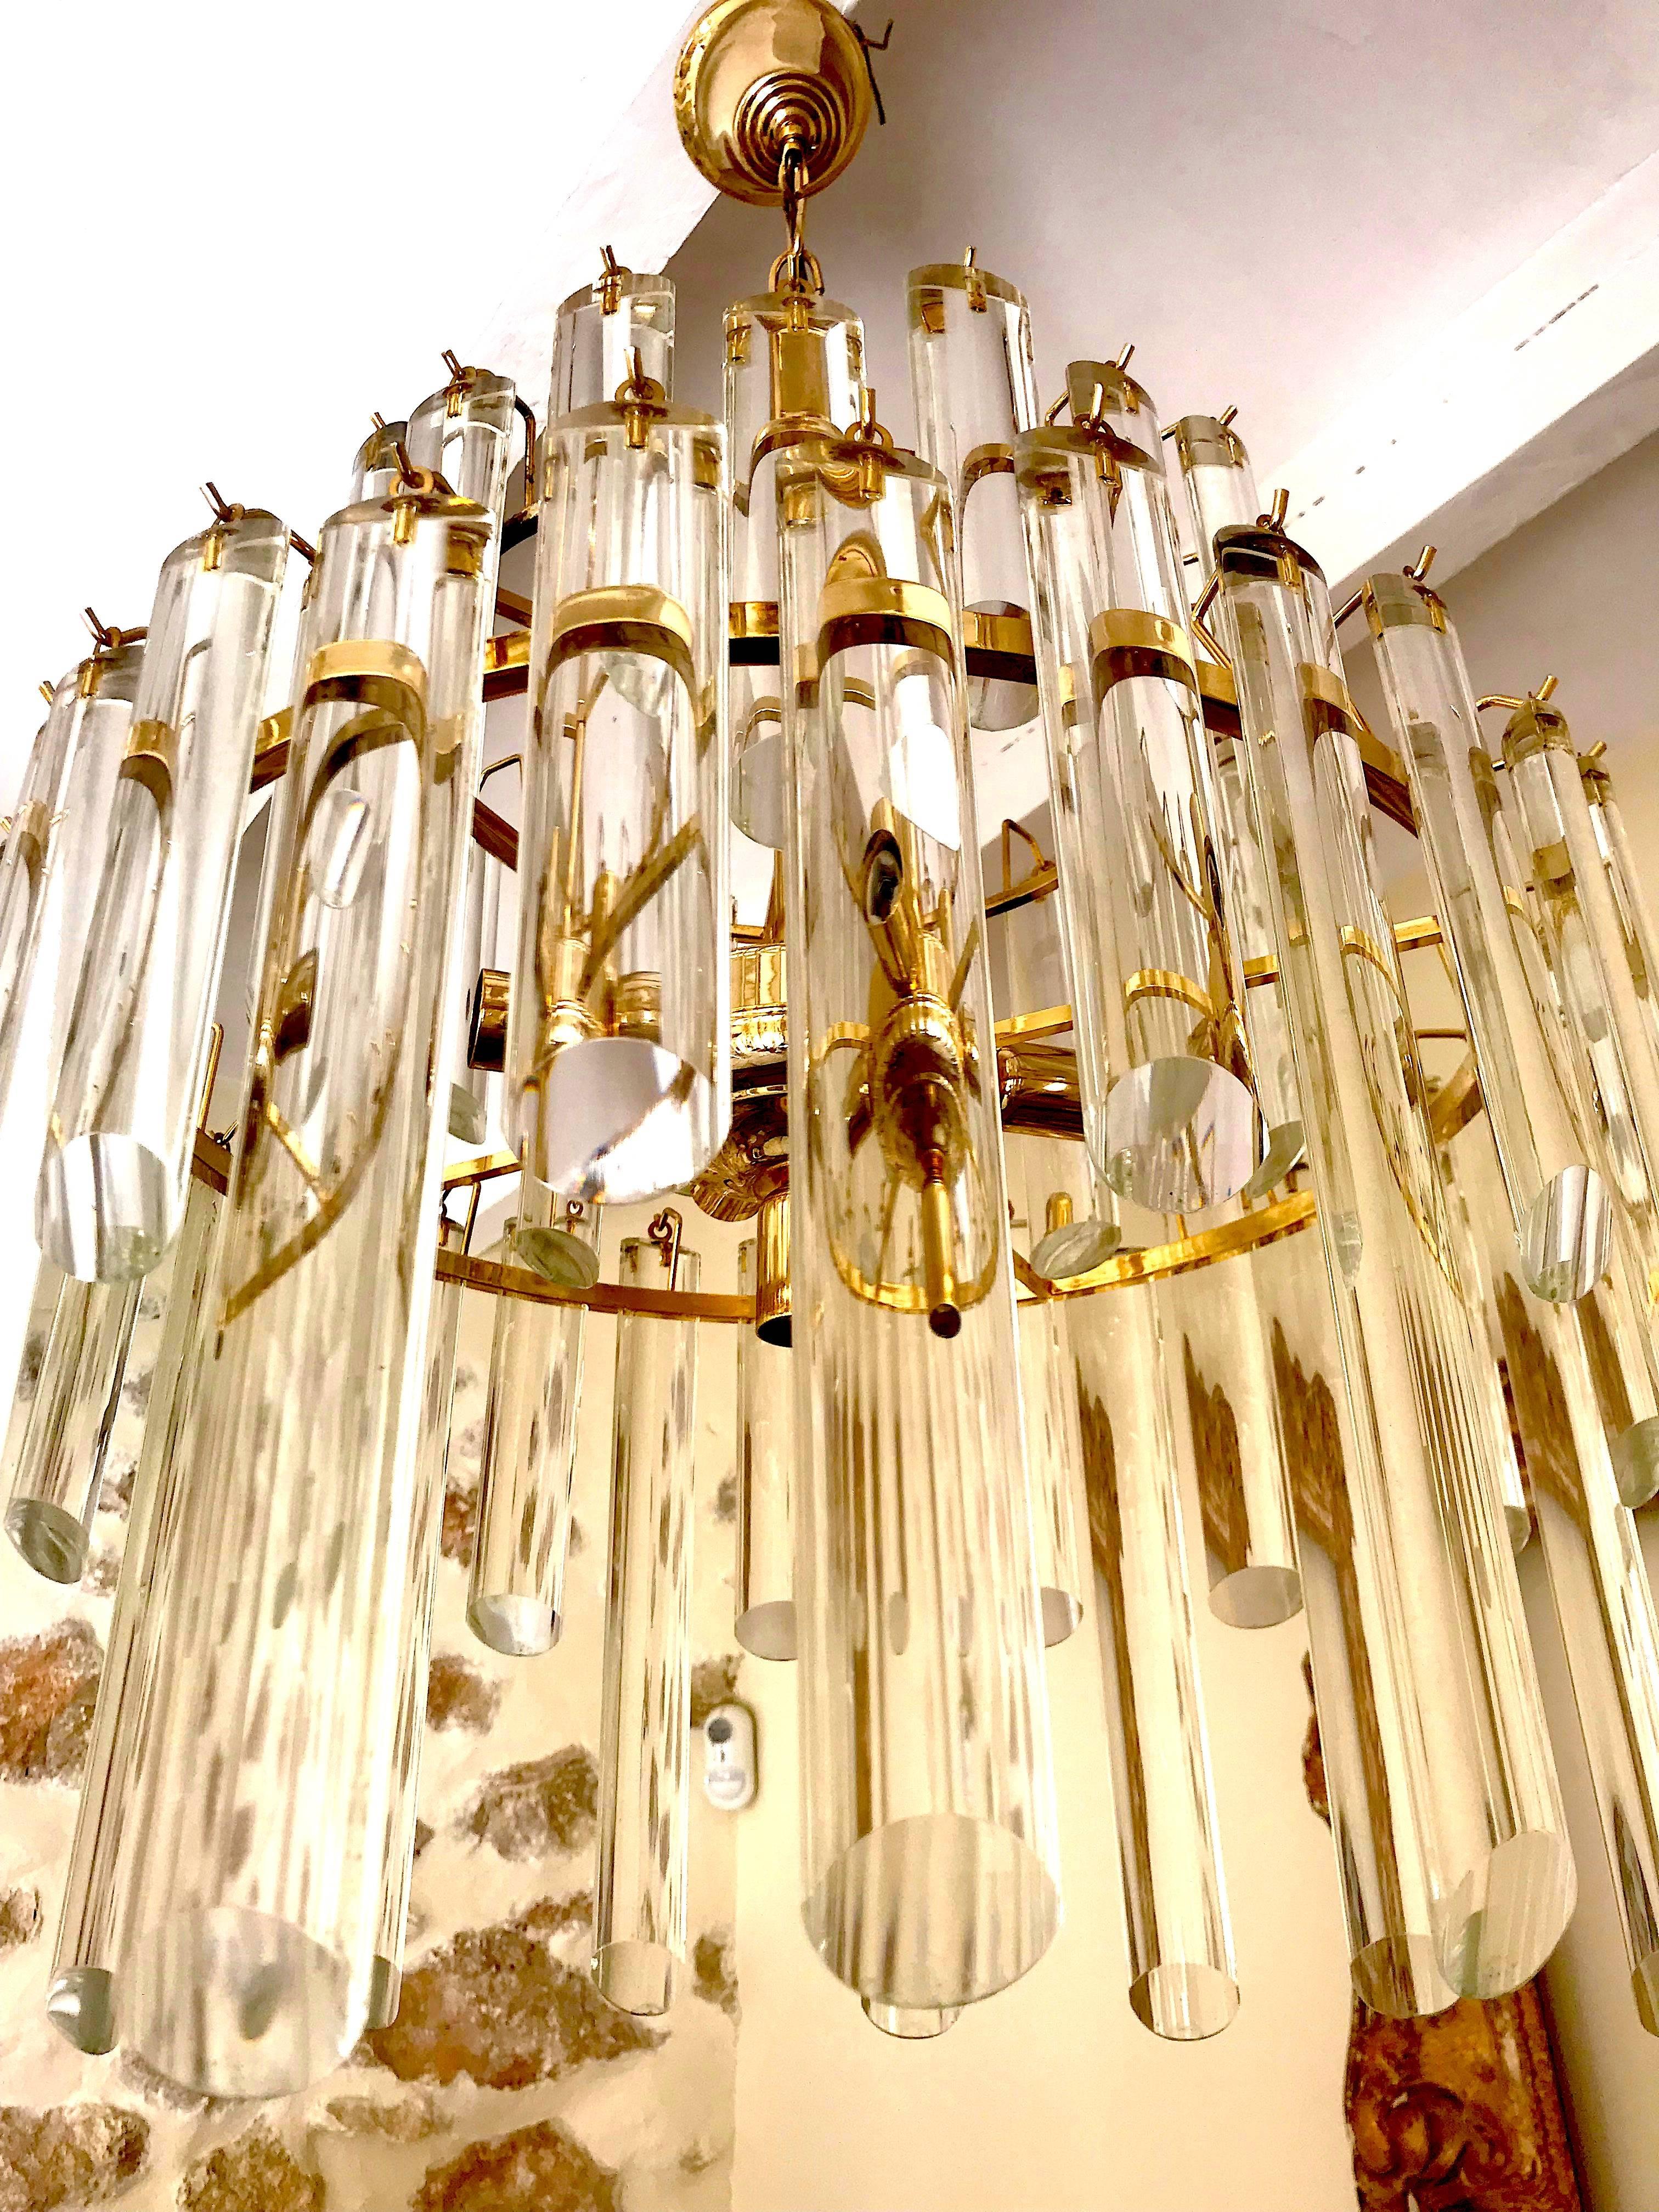 Italian Mid-Century Modern chandelier by Venini which has multi-tier cascading prisms. Consisting of clear crystals, circa 1960. Any amount of chain can be added for custom hanging length of the chandelier.
A real stunning ORIGINAL vintage period